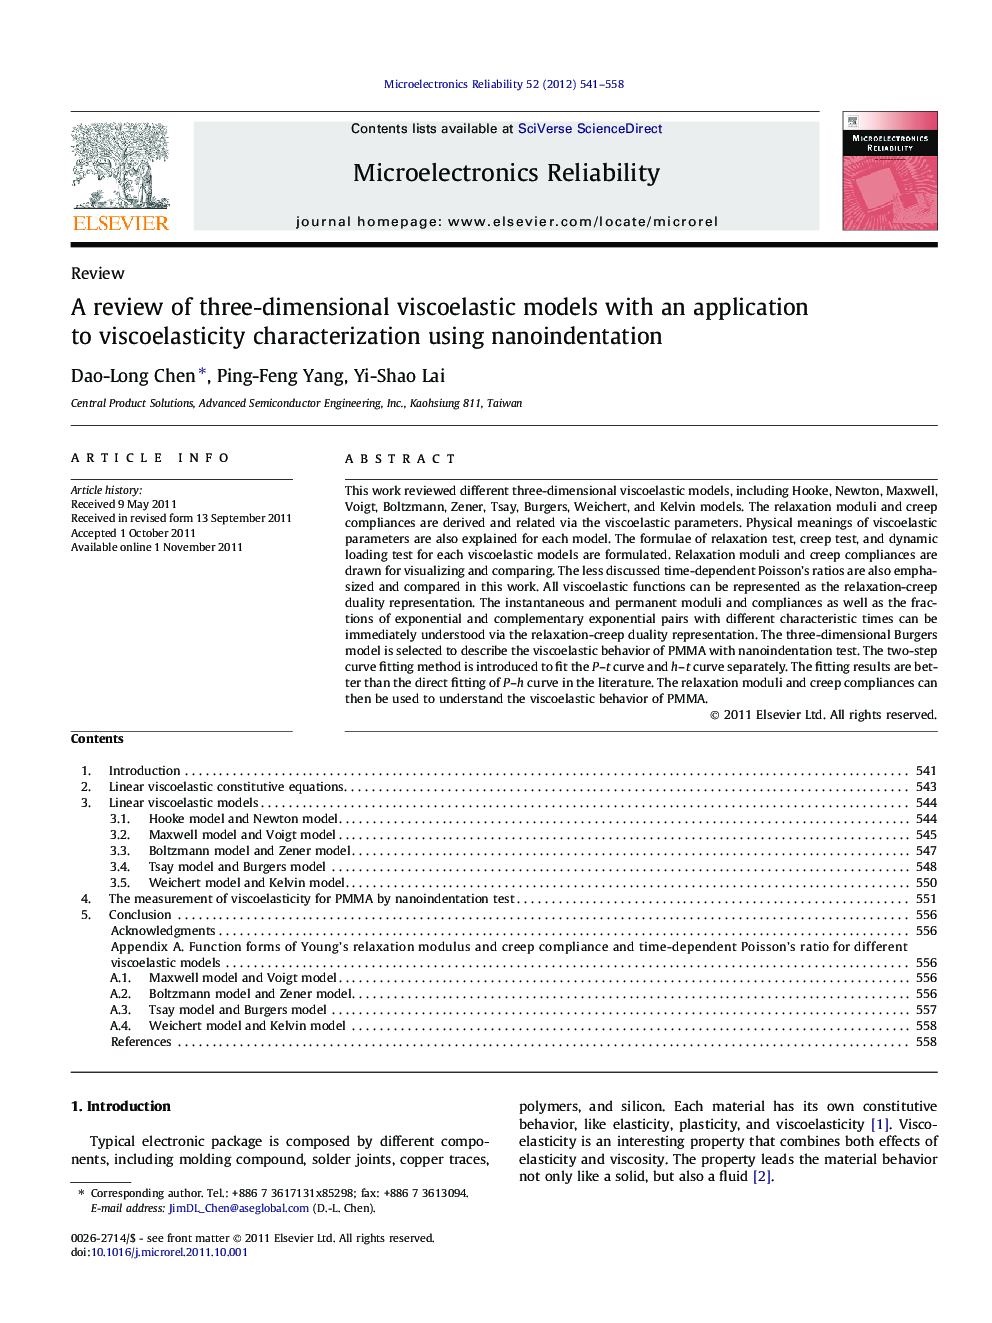 A review of three-dimensional viscoelastic models with an application to viscoelasticity characterization using nanoindentation